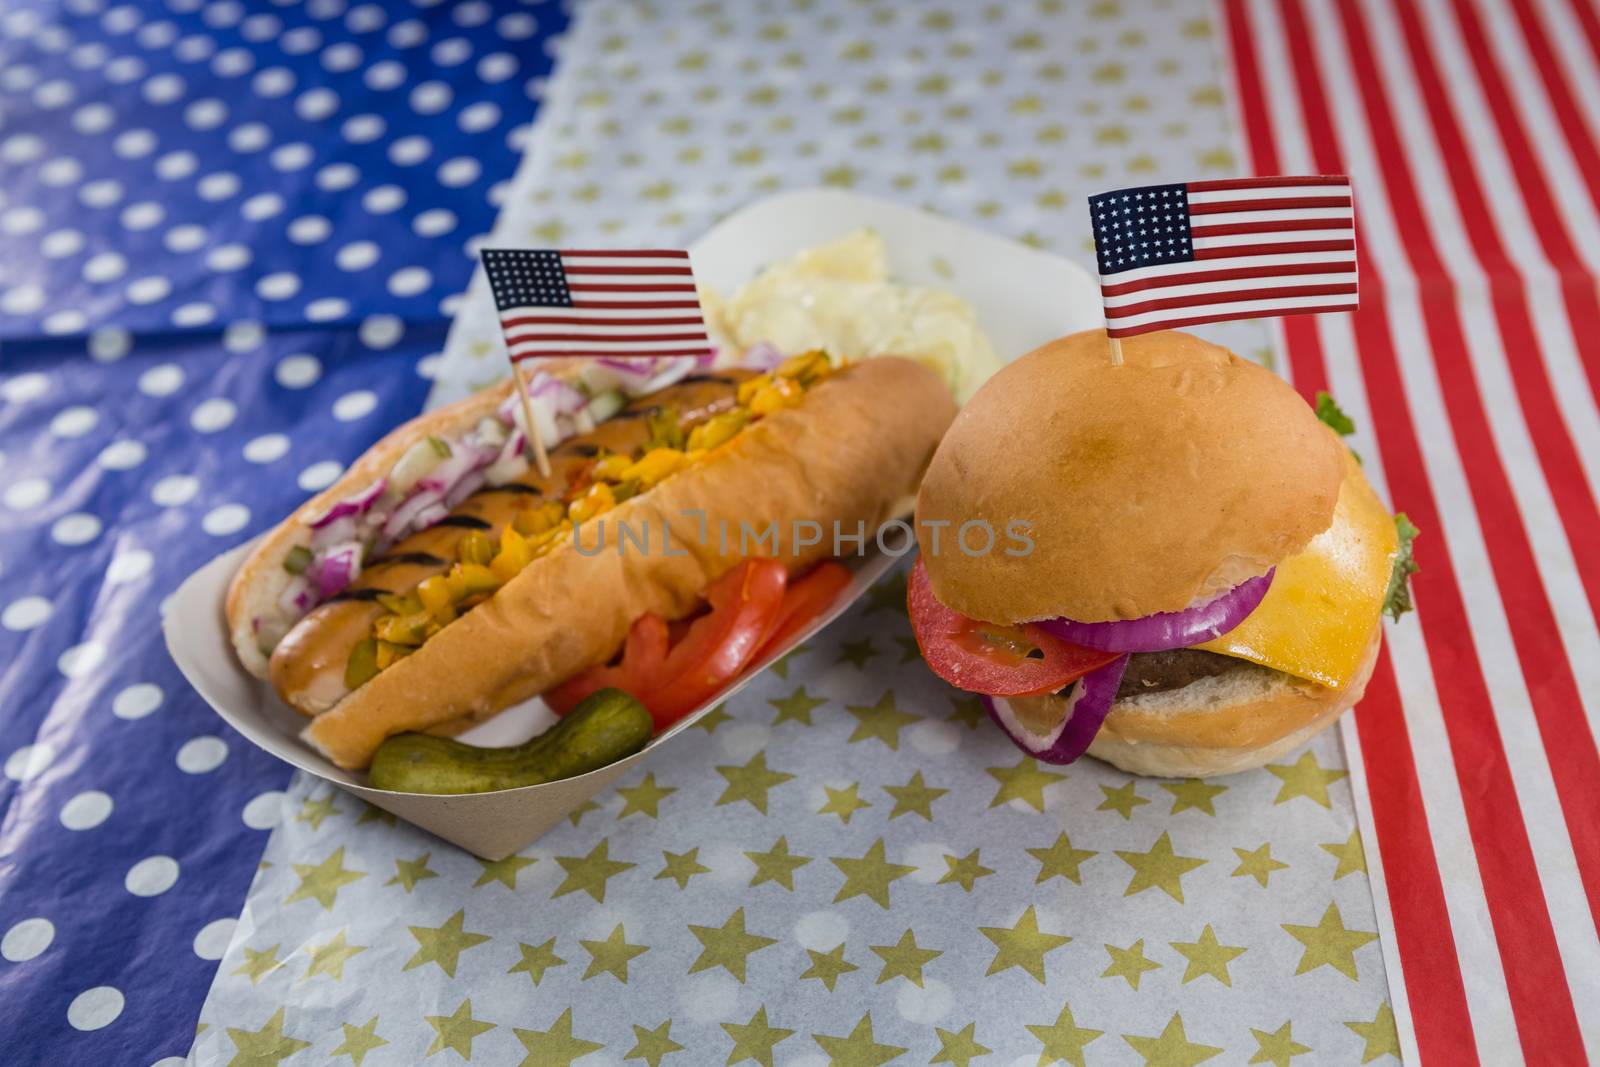 Burger and hot dog on wooden table with 4th july theme by Wavebreakmedia